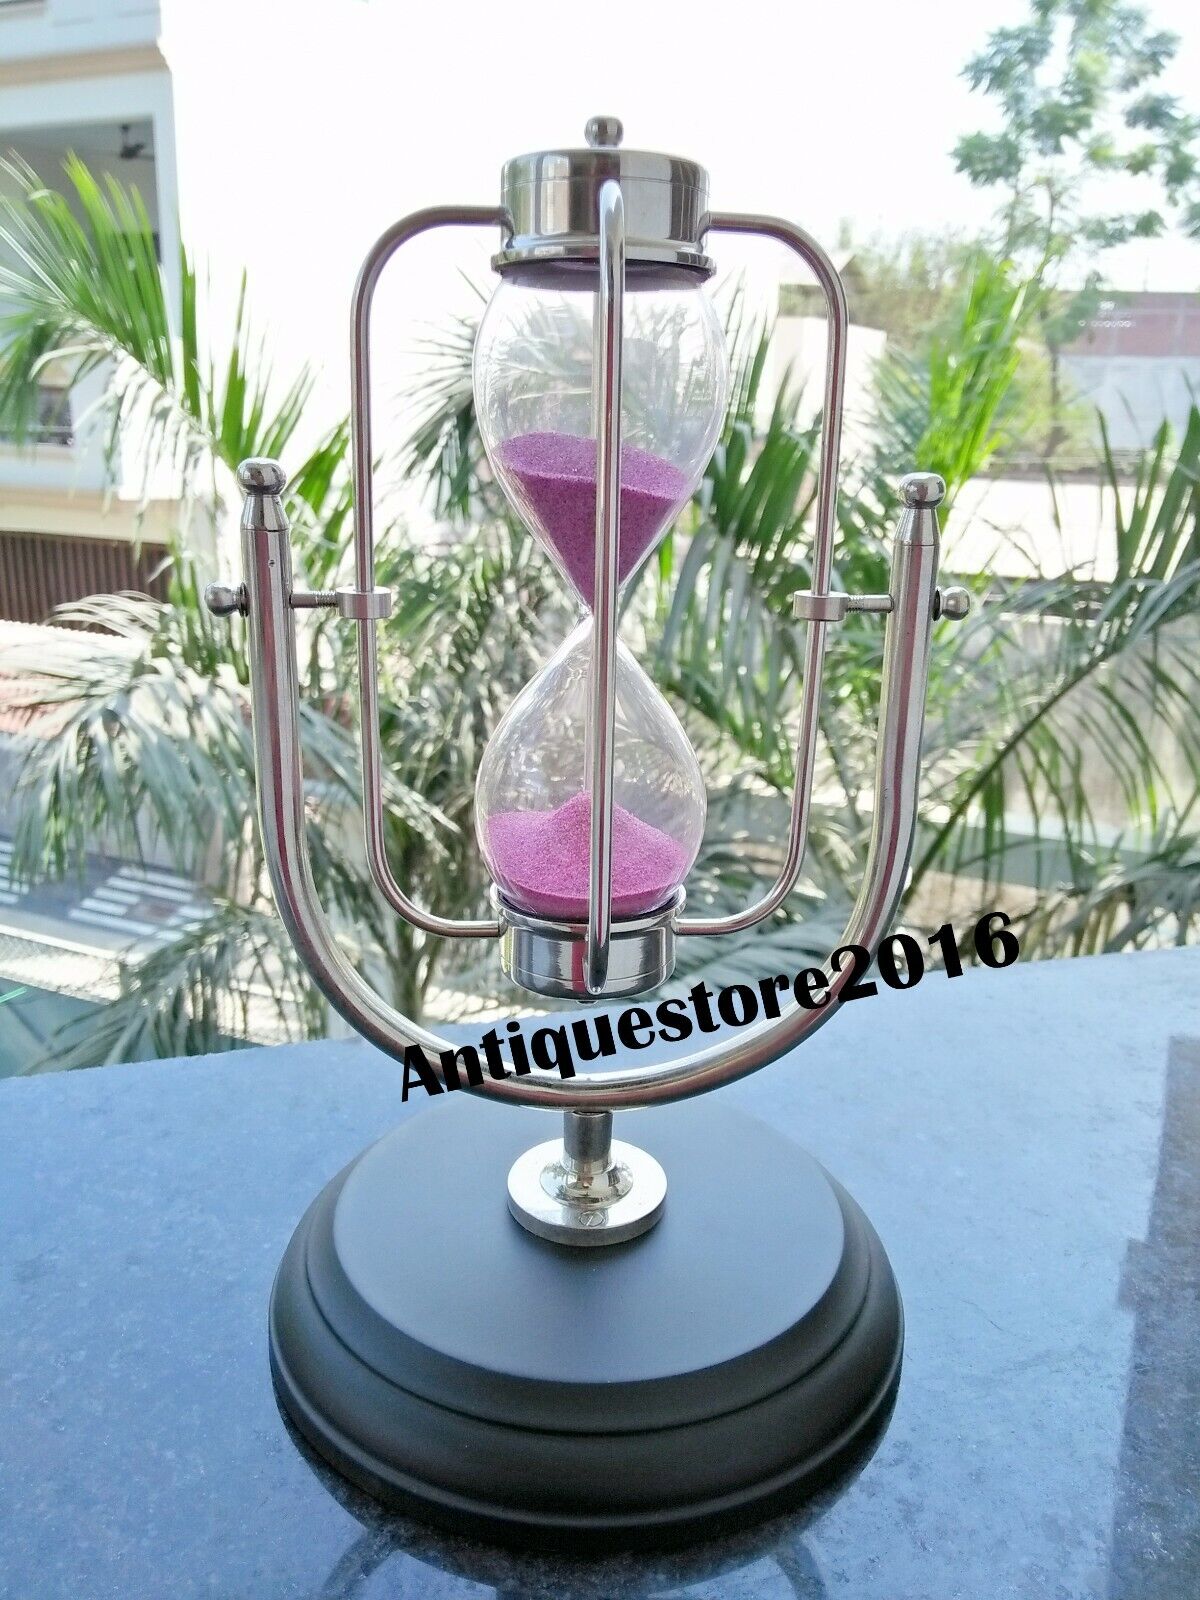 Desktop brass sand timer kitchen watch nautical table top collectible decor gift